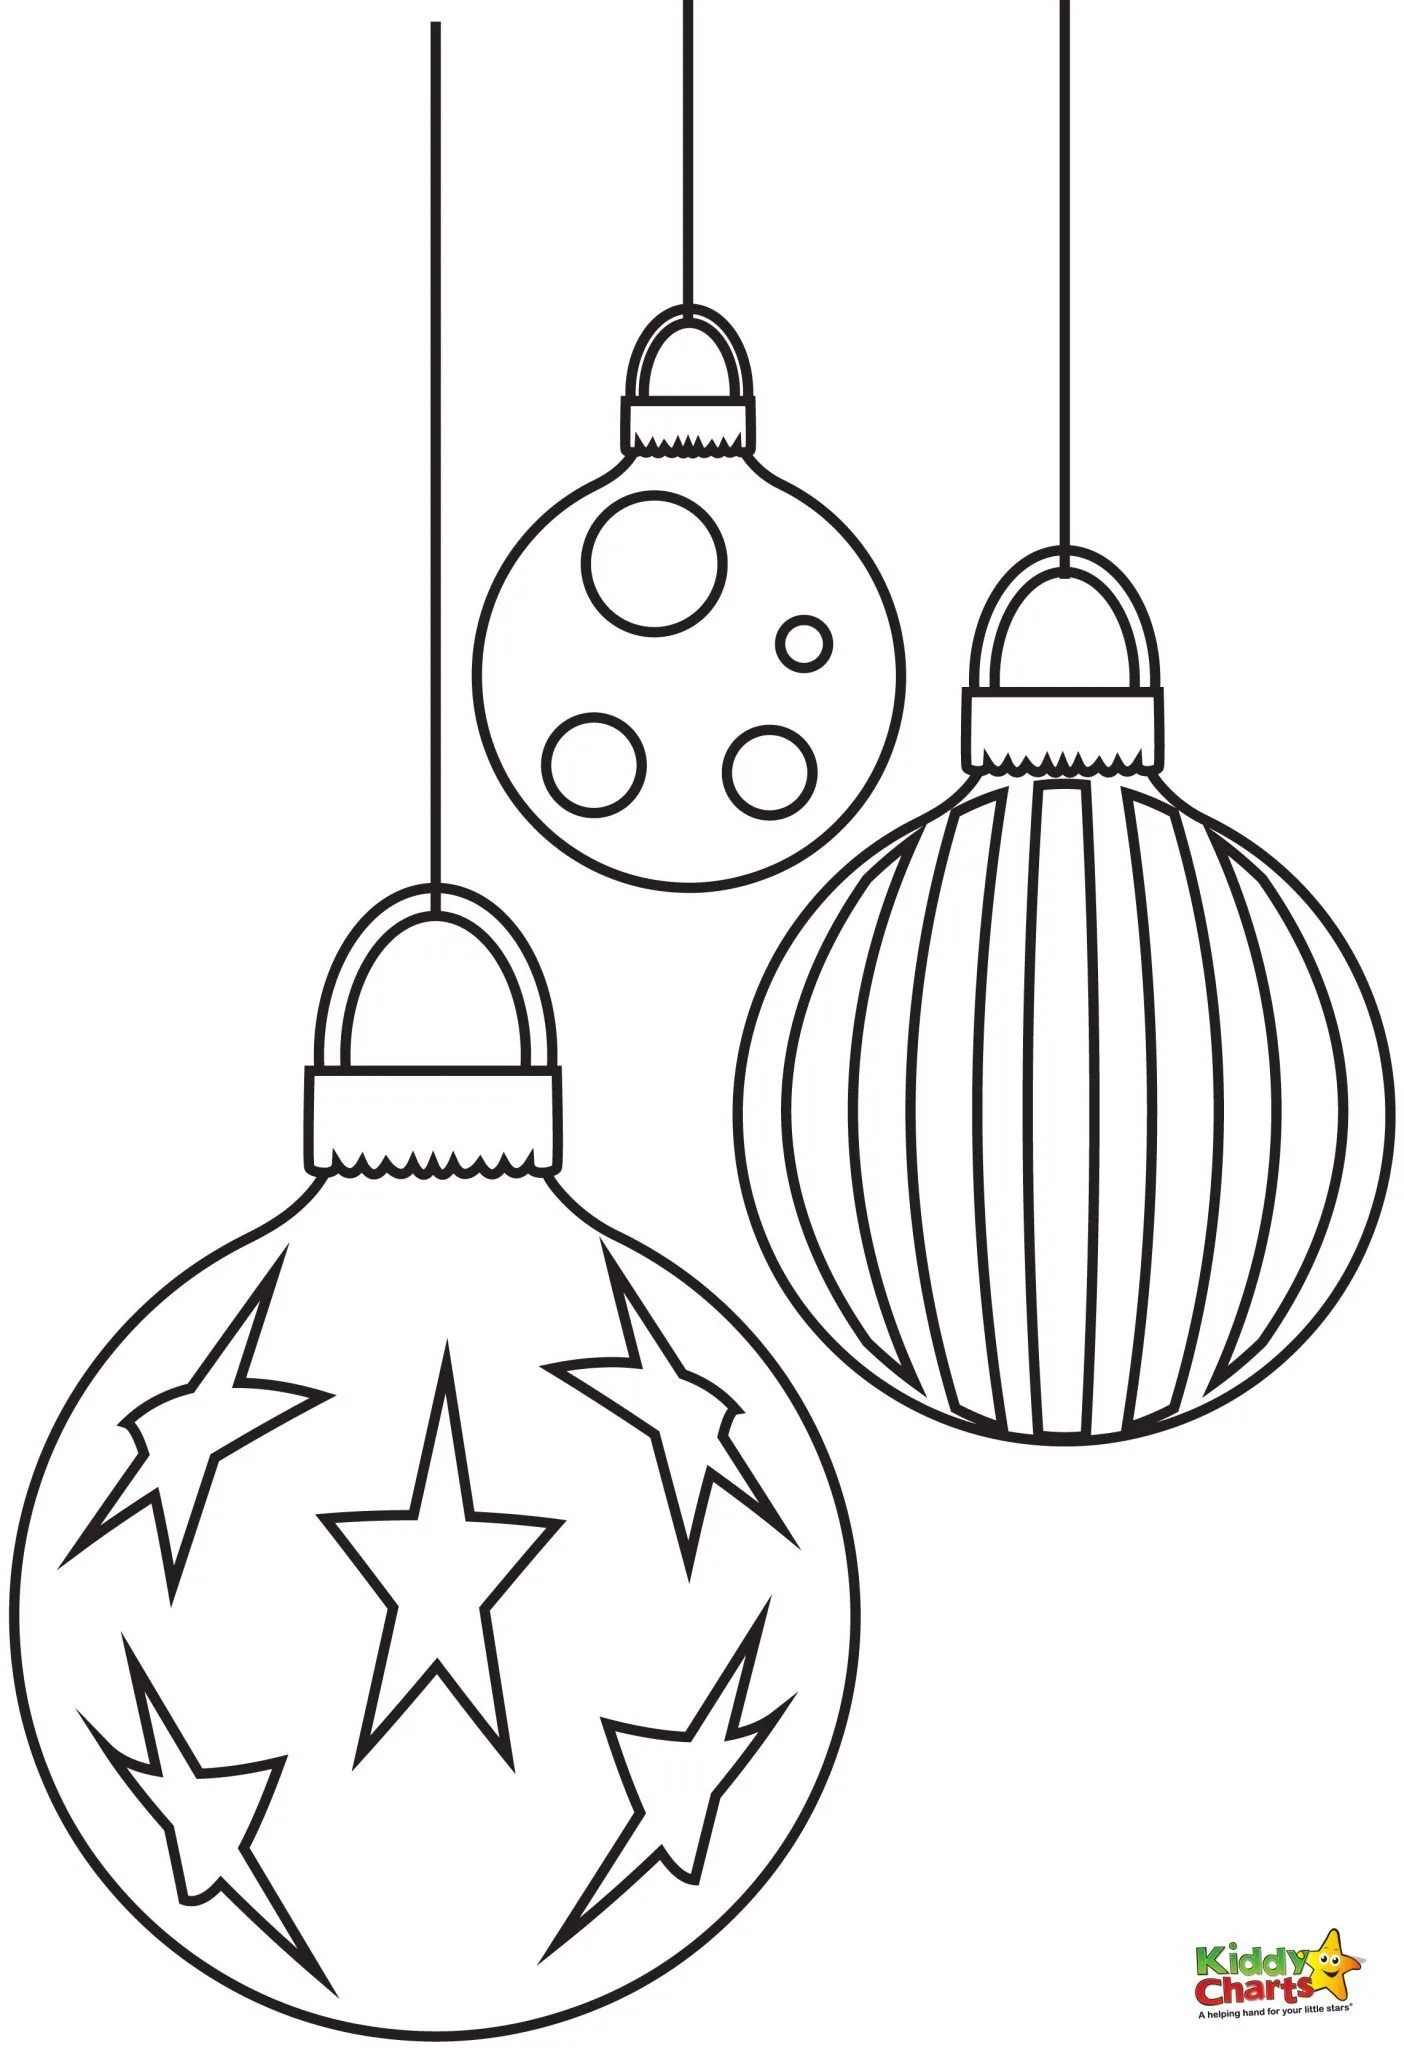 baubles - free christmas coloring pages